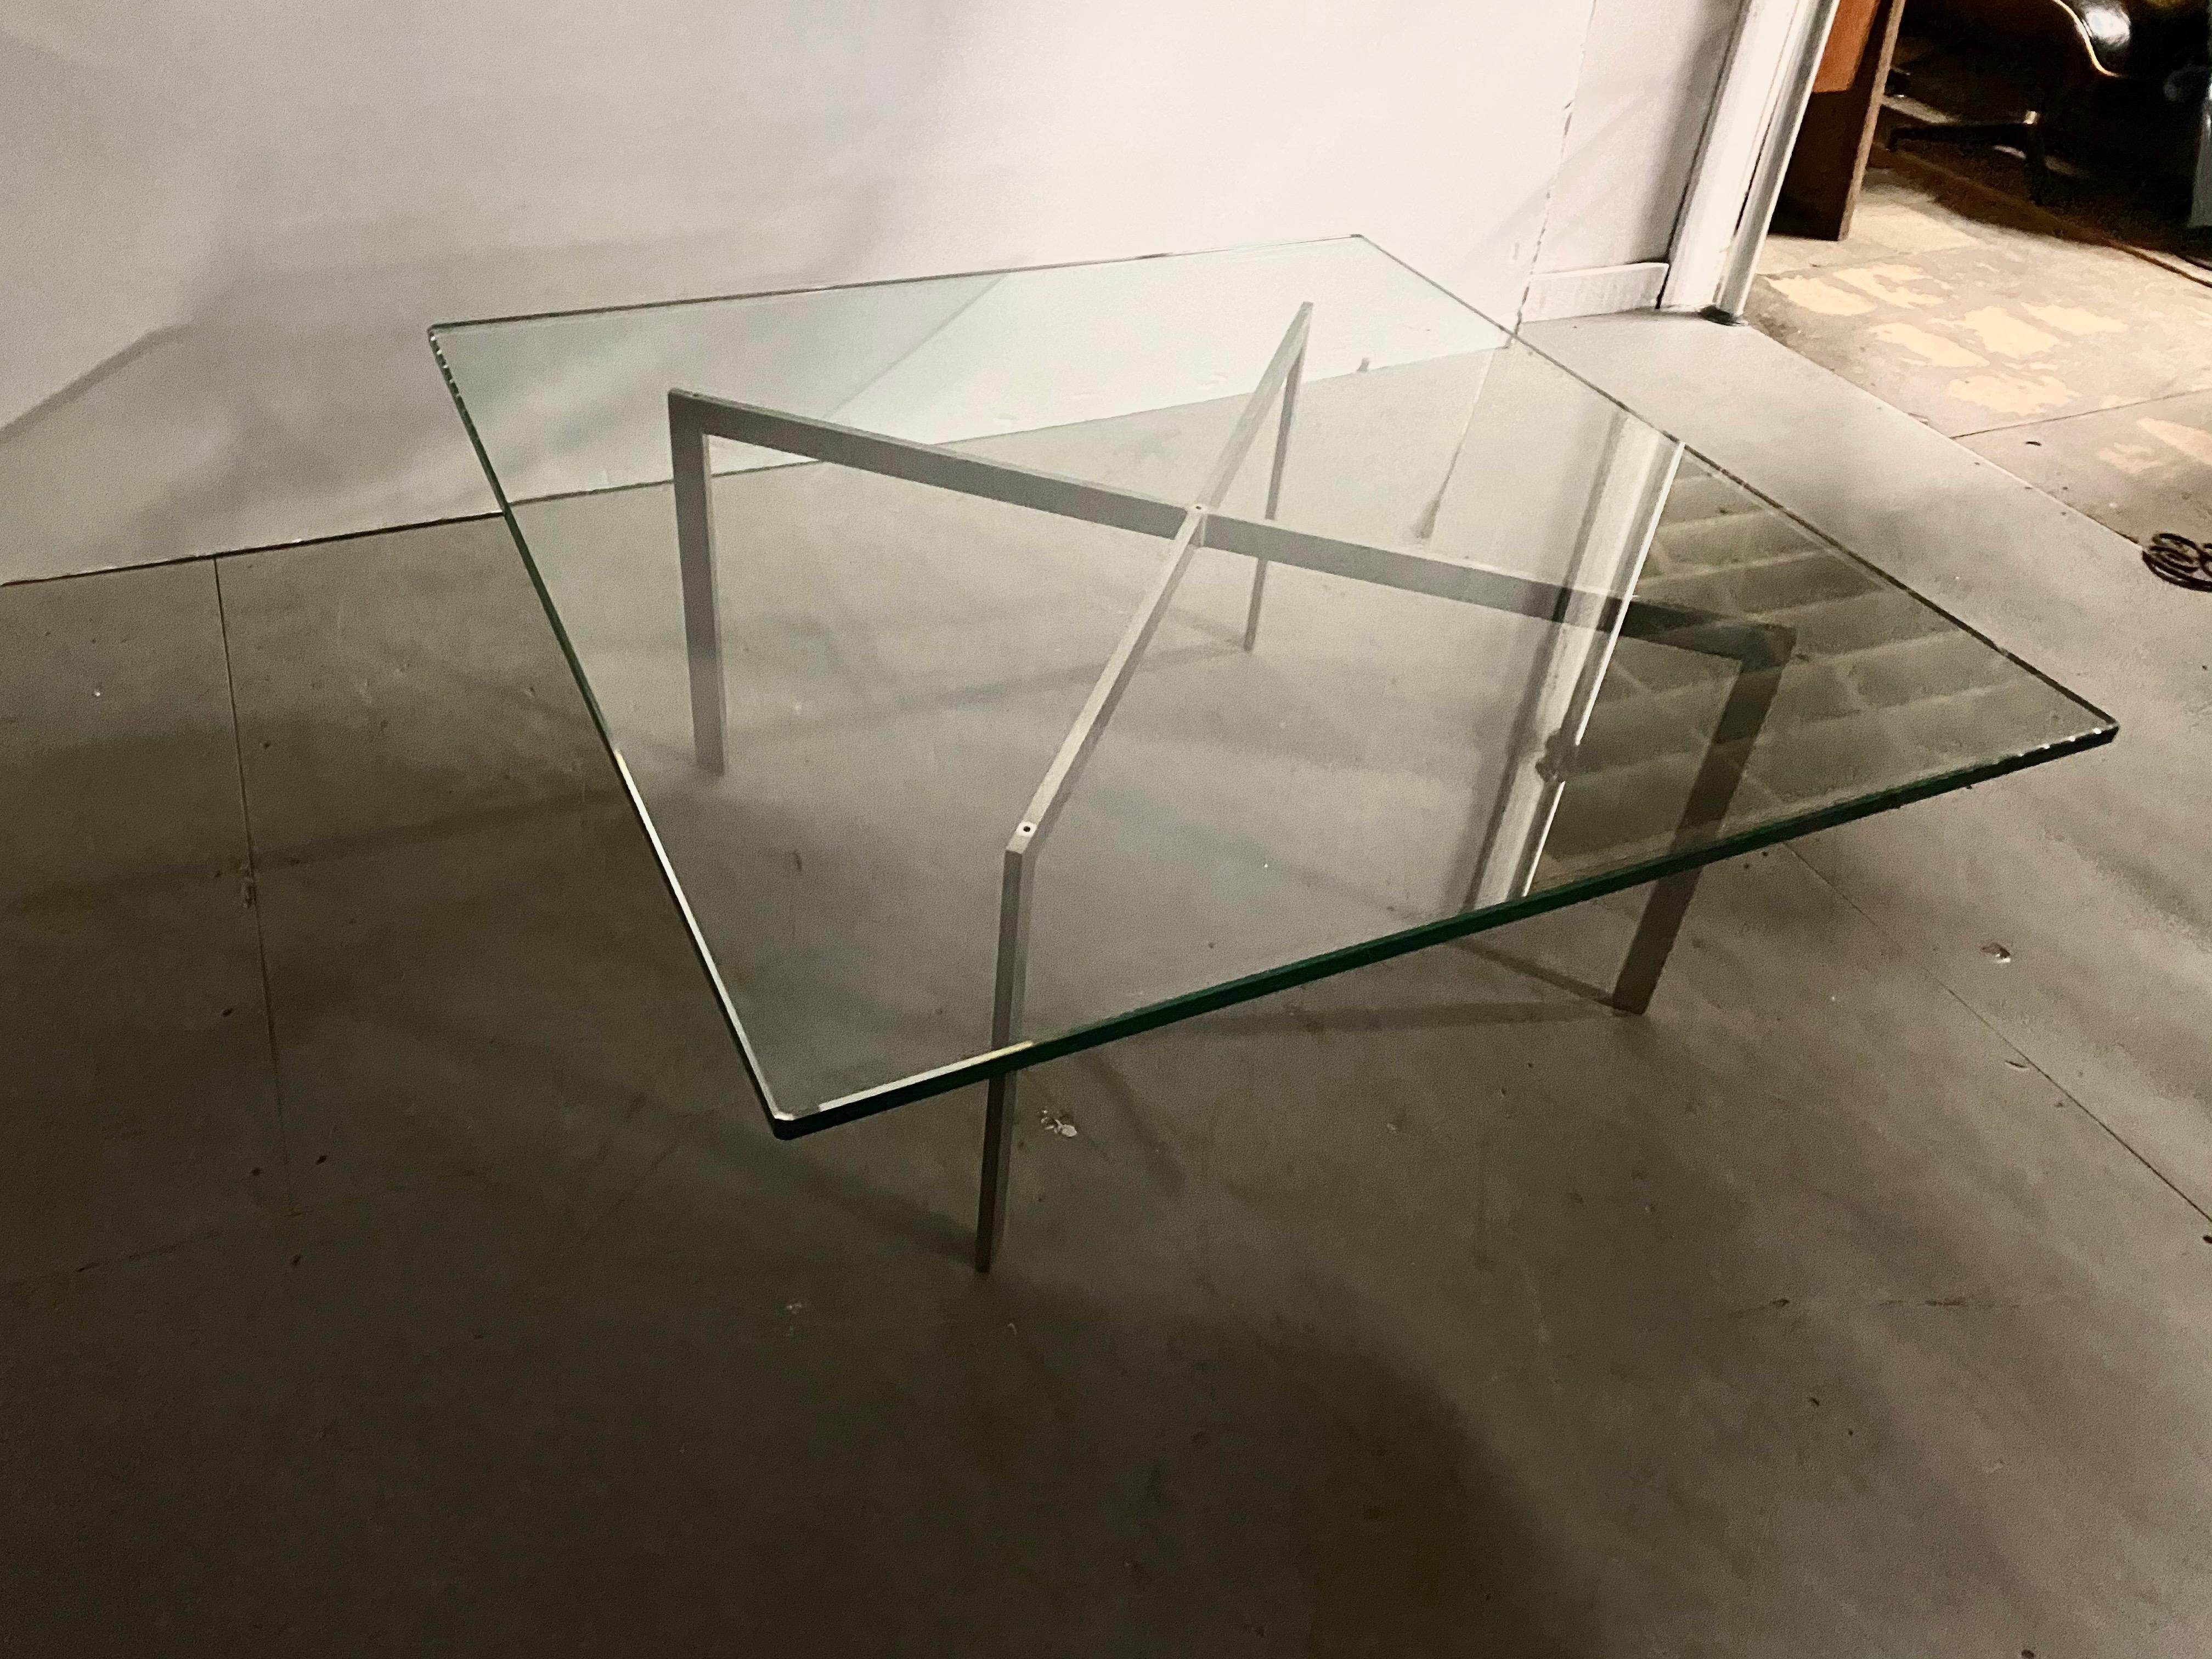 Stainless Steel Mies Van Der Rohe Label Stamped Barcelona Table, Knoll Products, circa 1970s For Sale